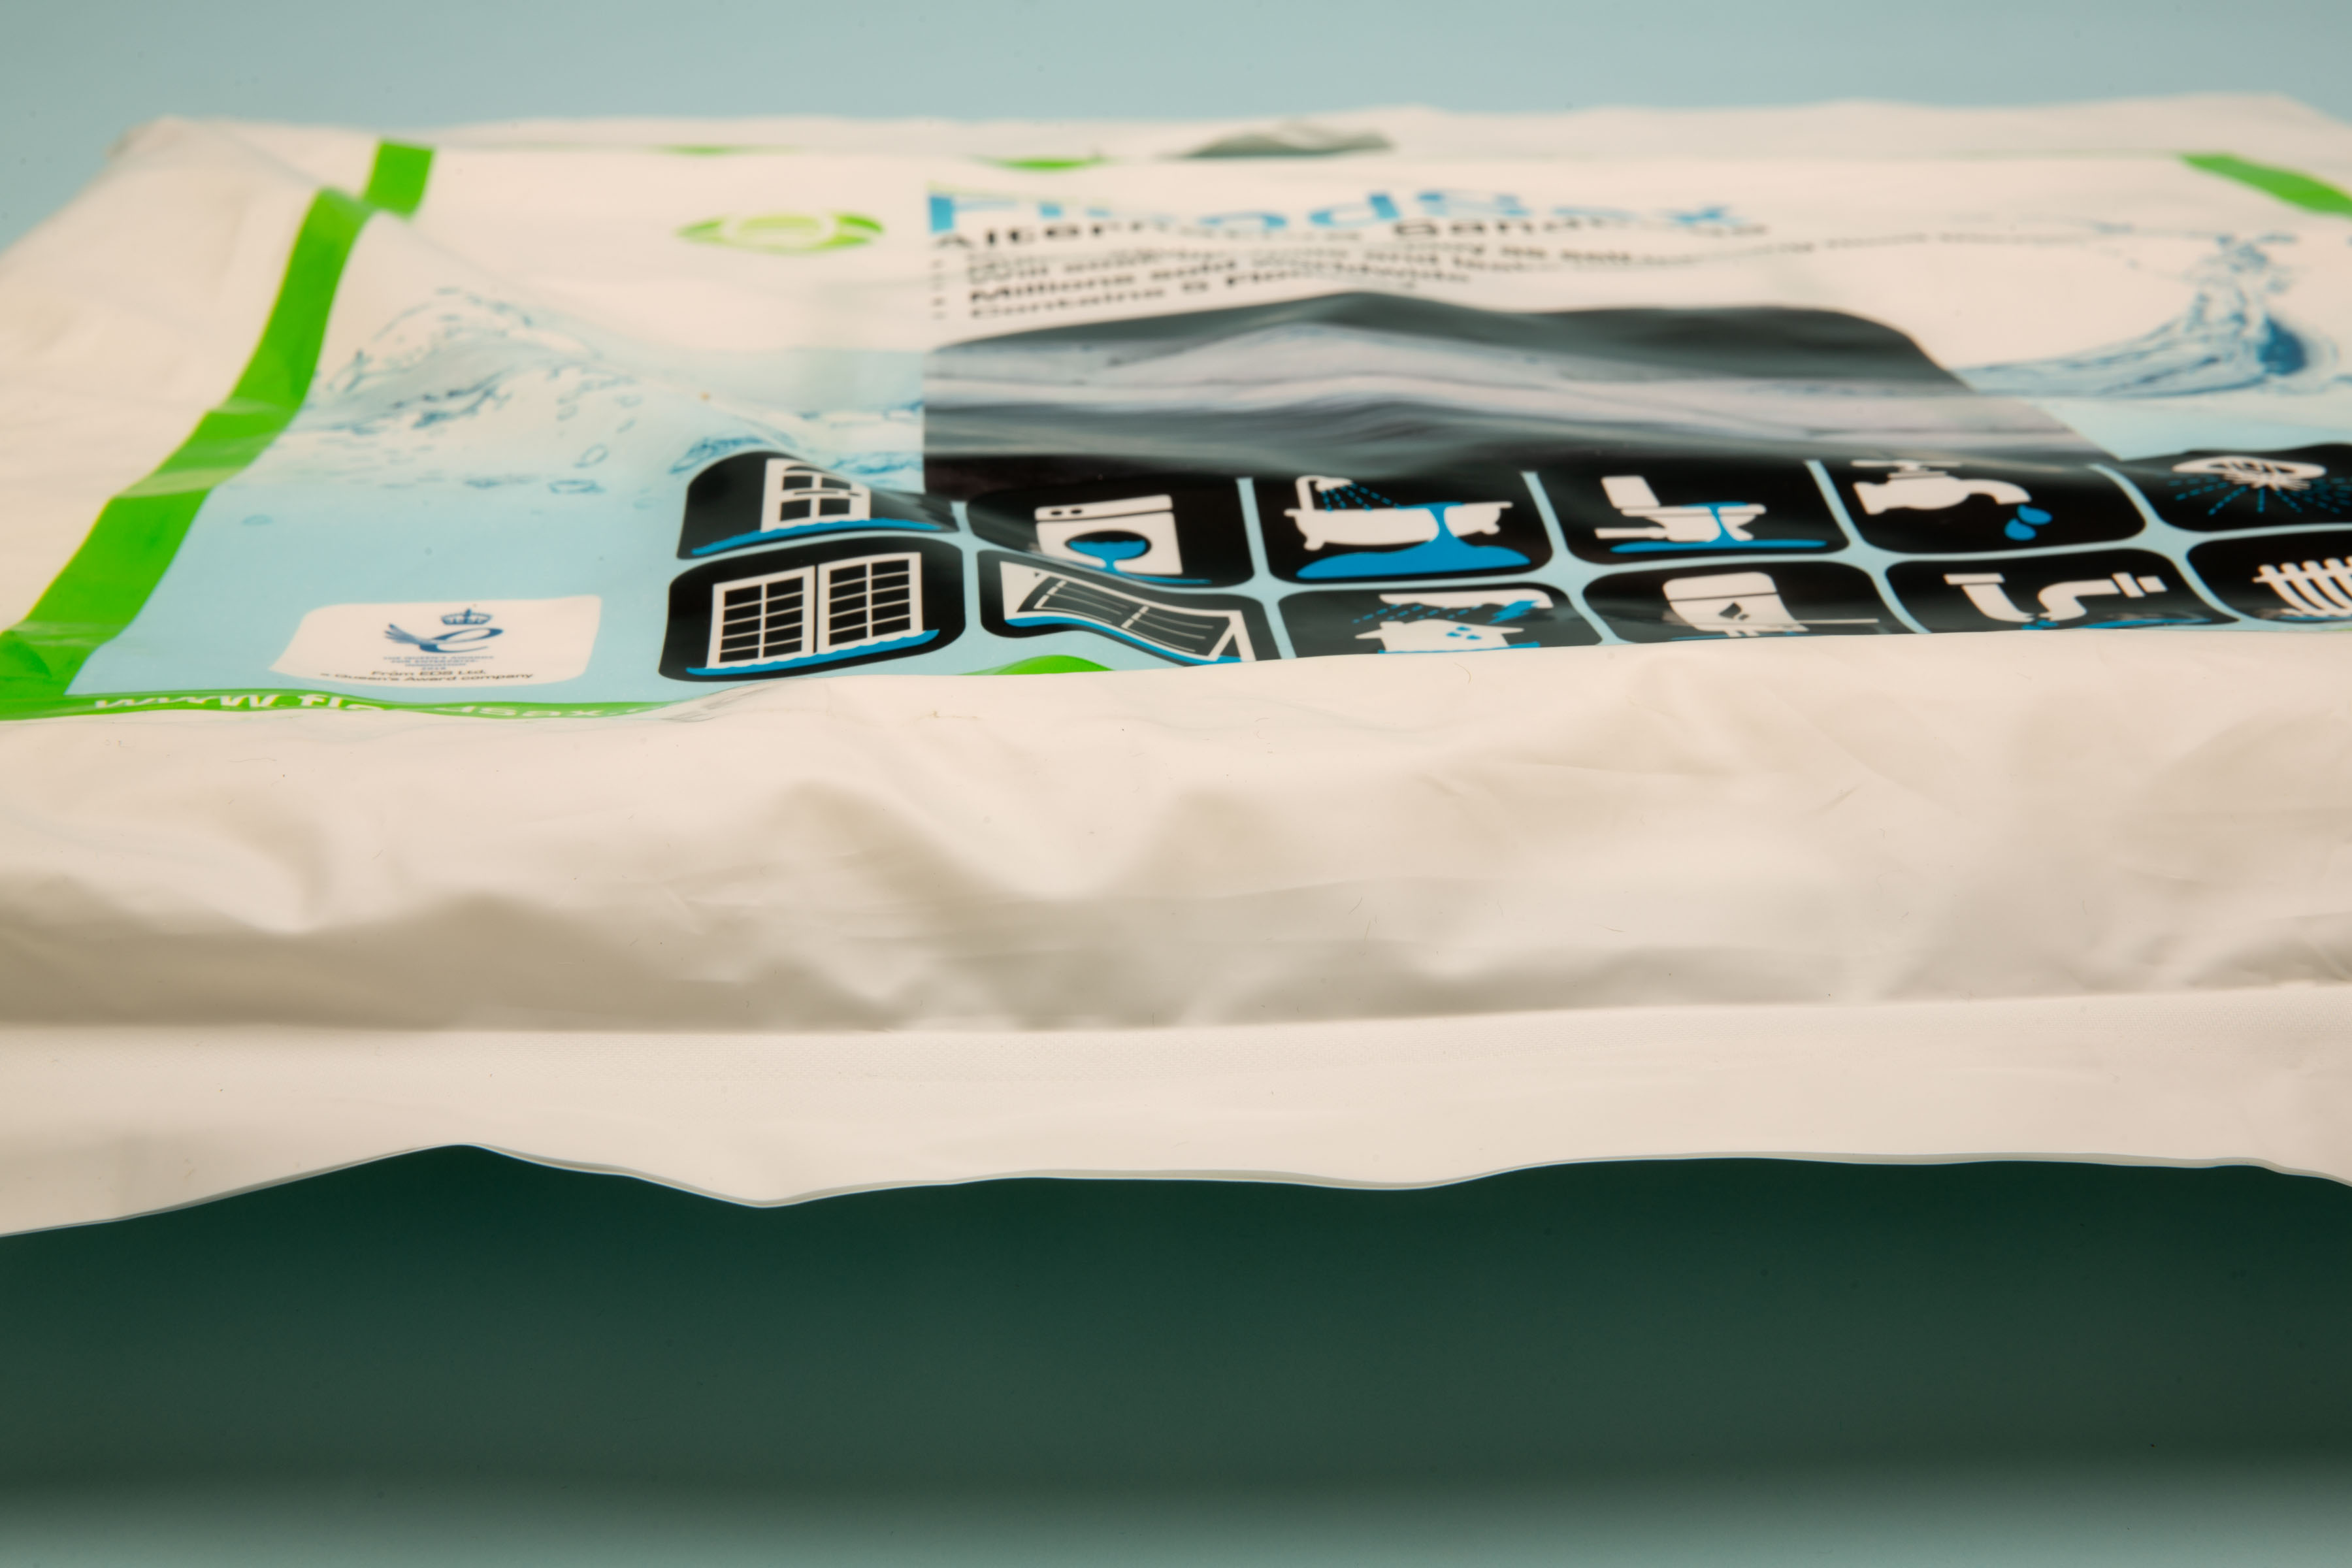 Close-up high-resolution image of a single FloodSax packaging, featuring clear branding and illustrative images demonstrating its flood defense applications.